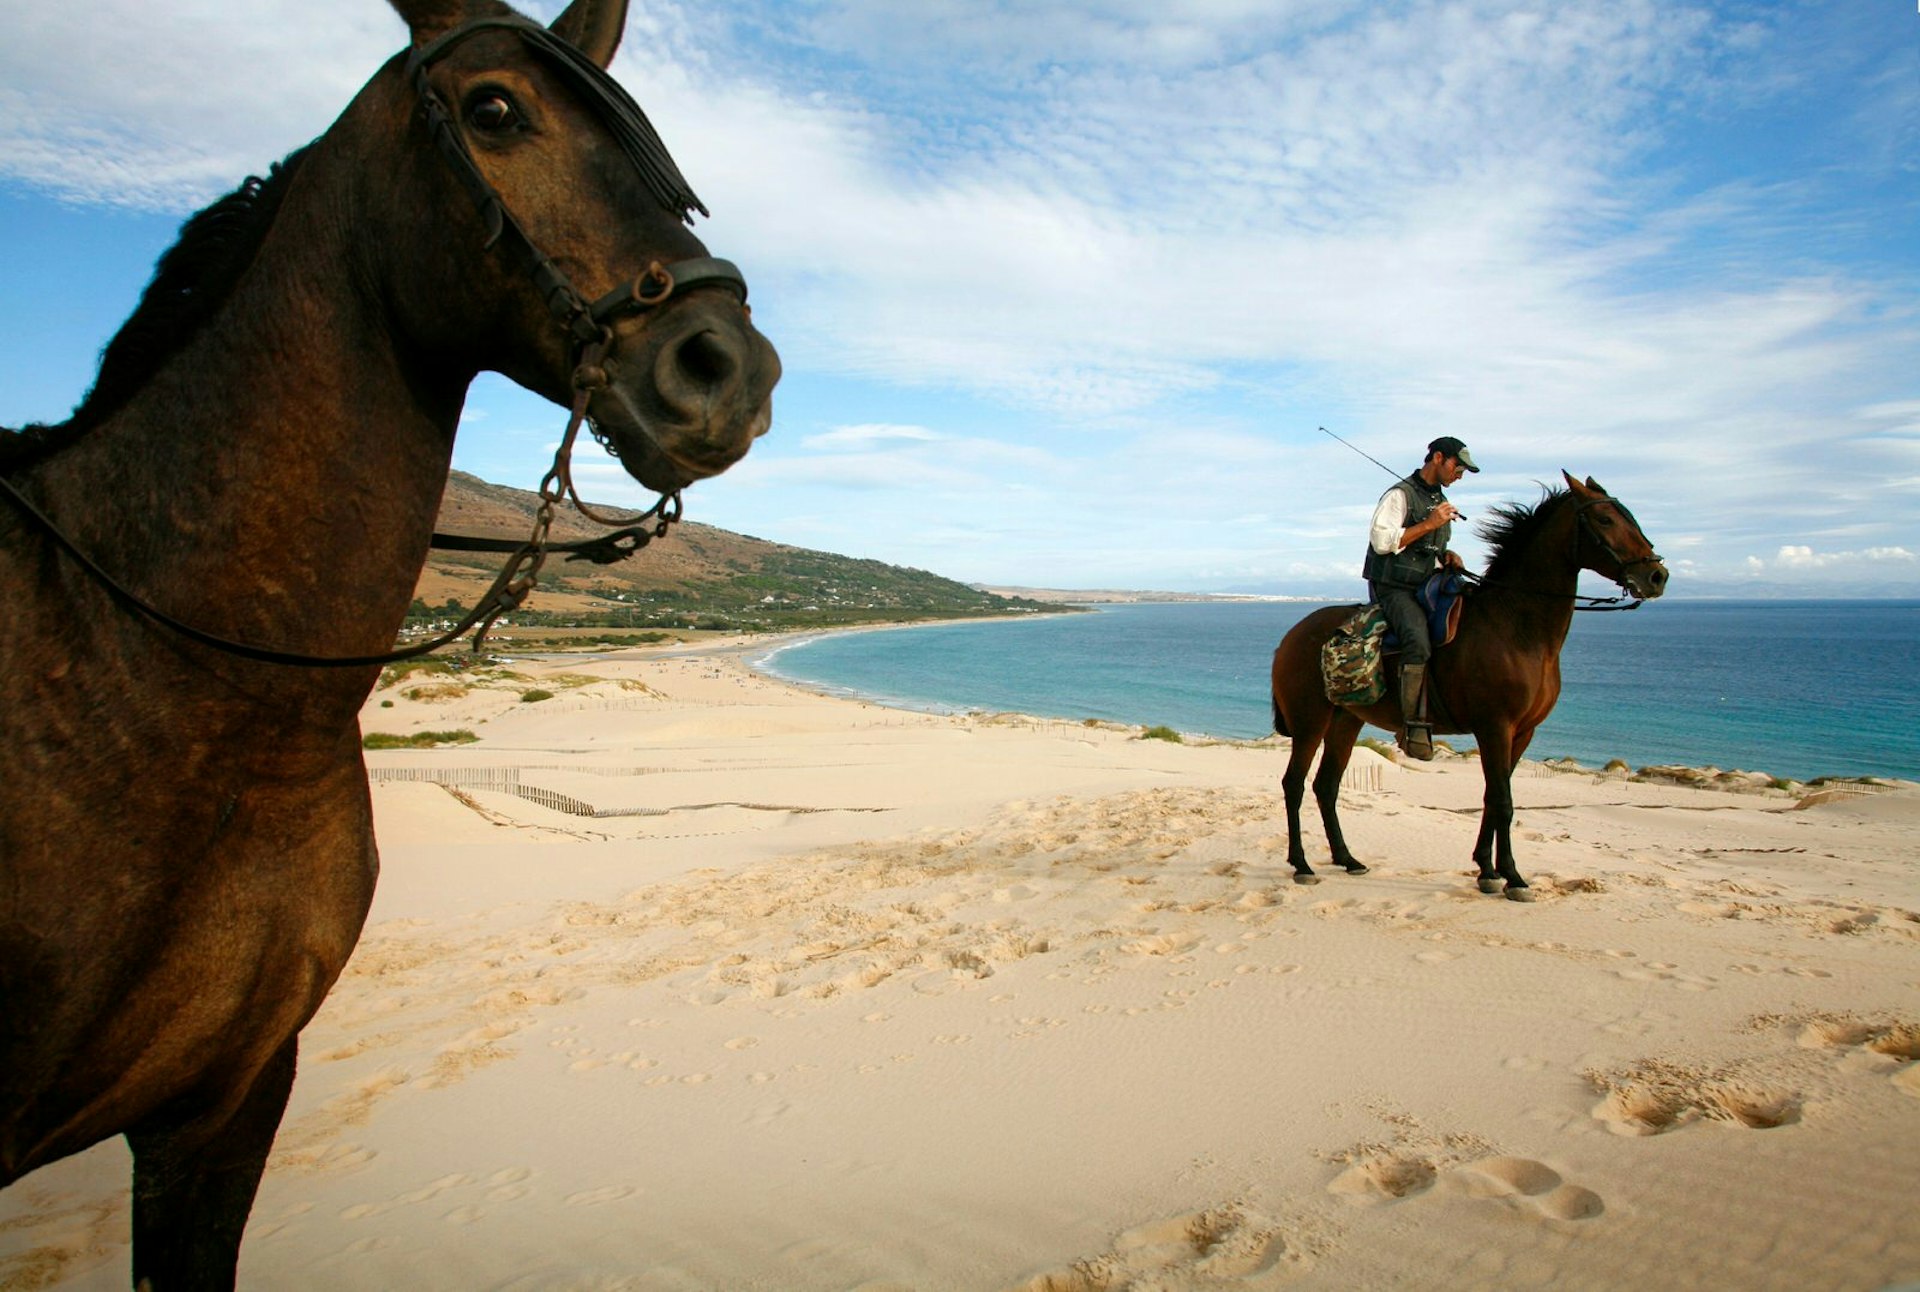 Two people riding brown horses on the otherwise deserted dune of Ensenada de Valdvaqueros with a view over Playa de los Lances beach.